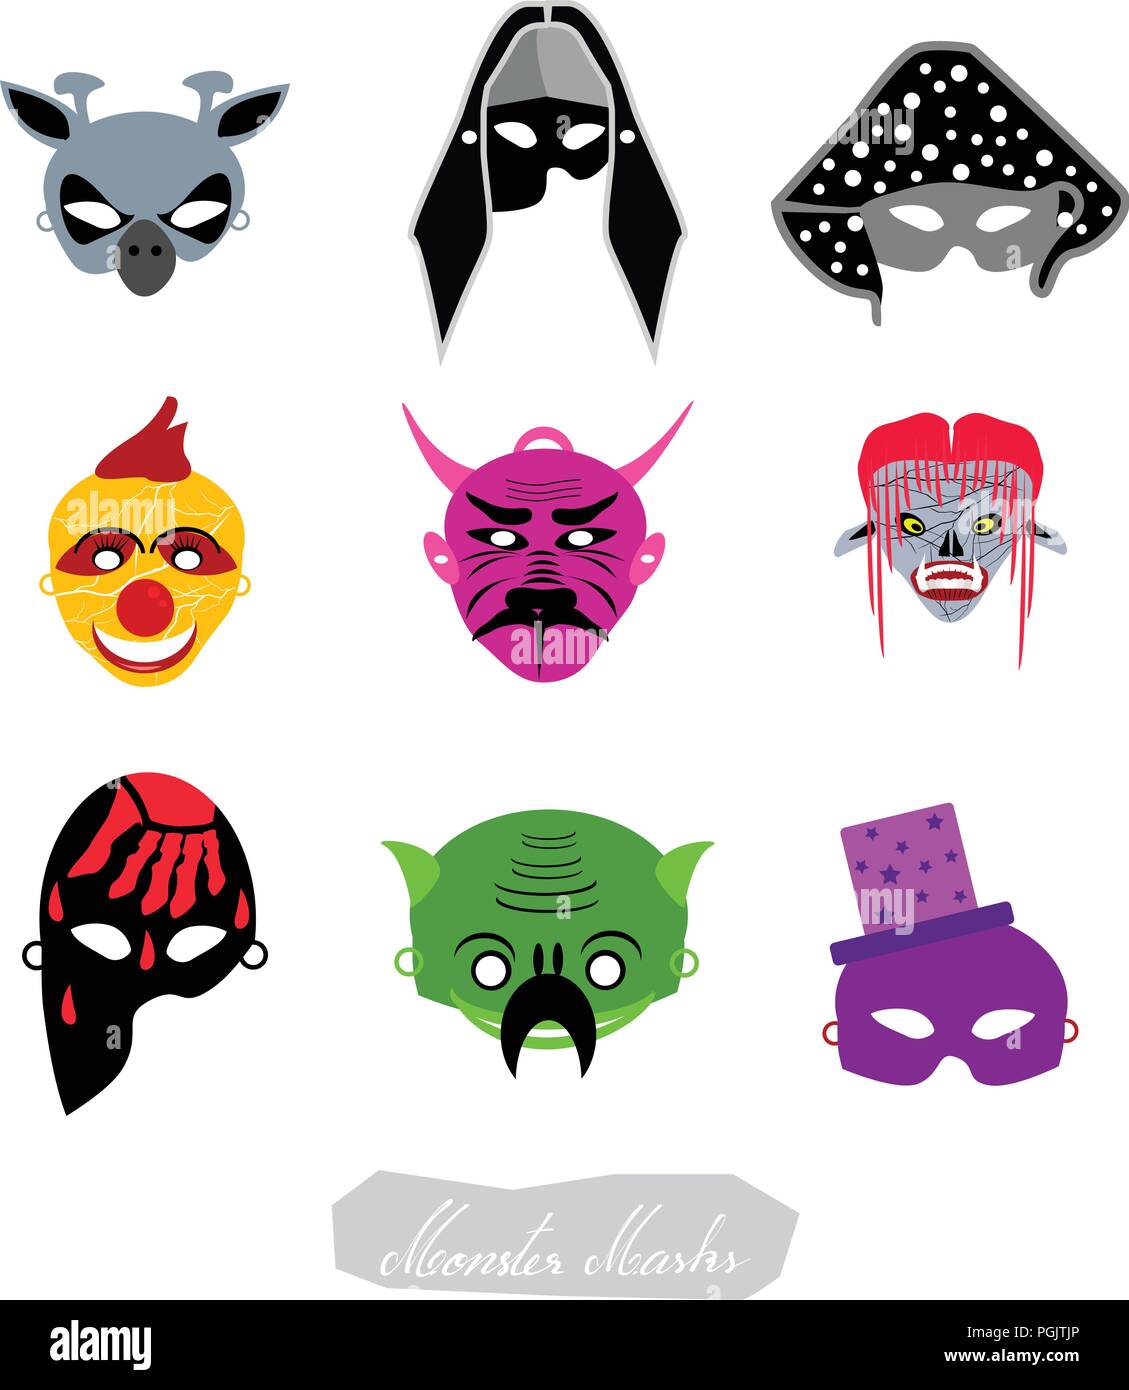 Holidays And Celebrations, Illustration Set of Clowns, Aliens and Evils Masks For Halloween Celebration Party. Stock Vector